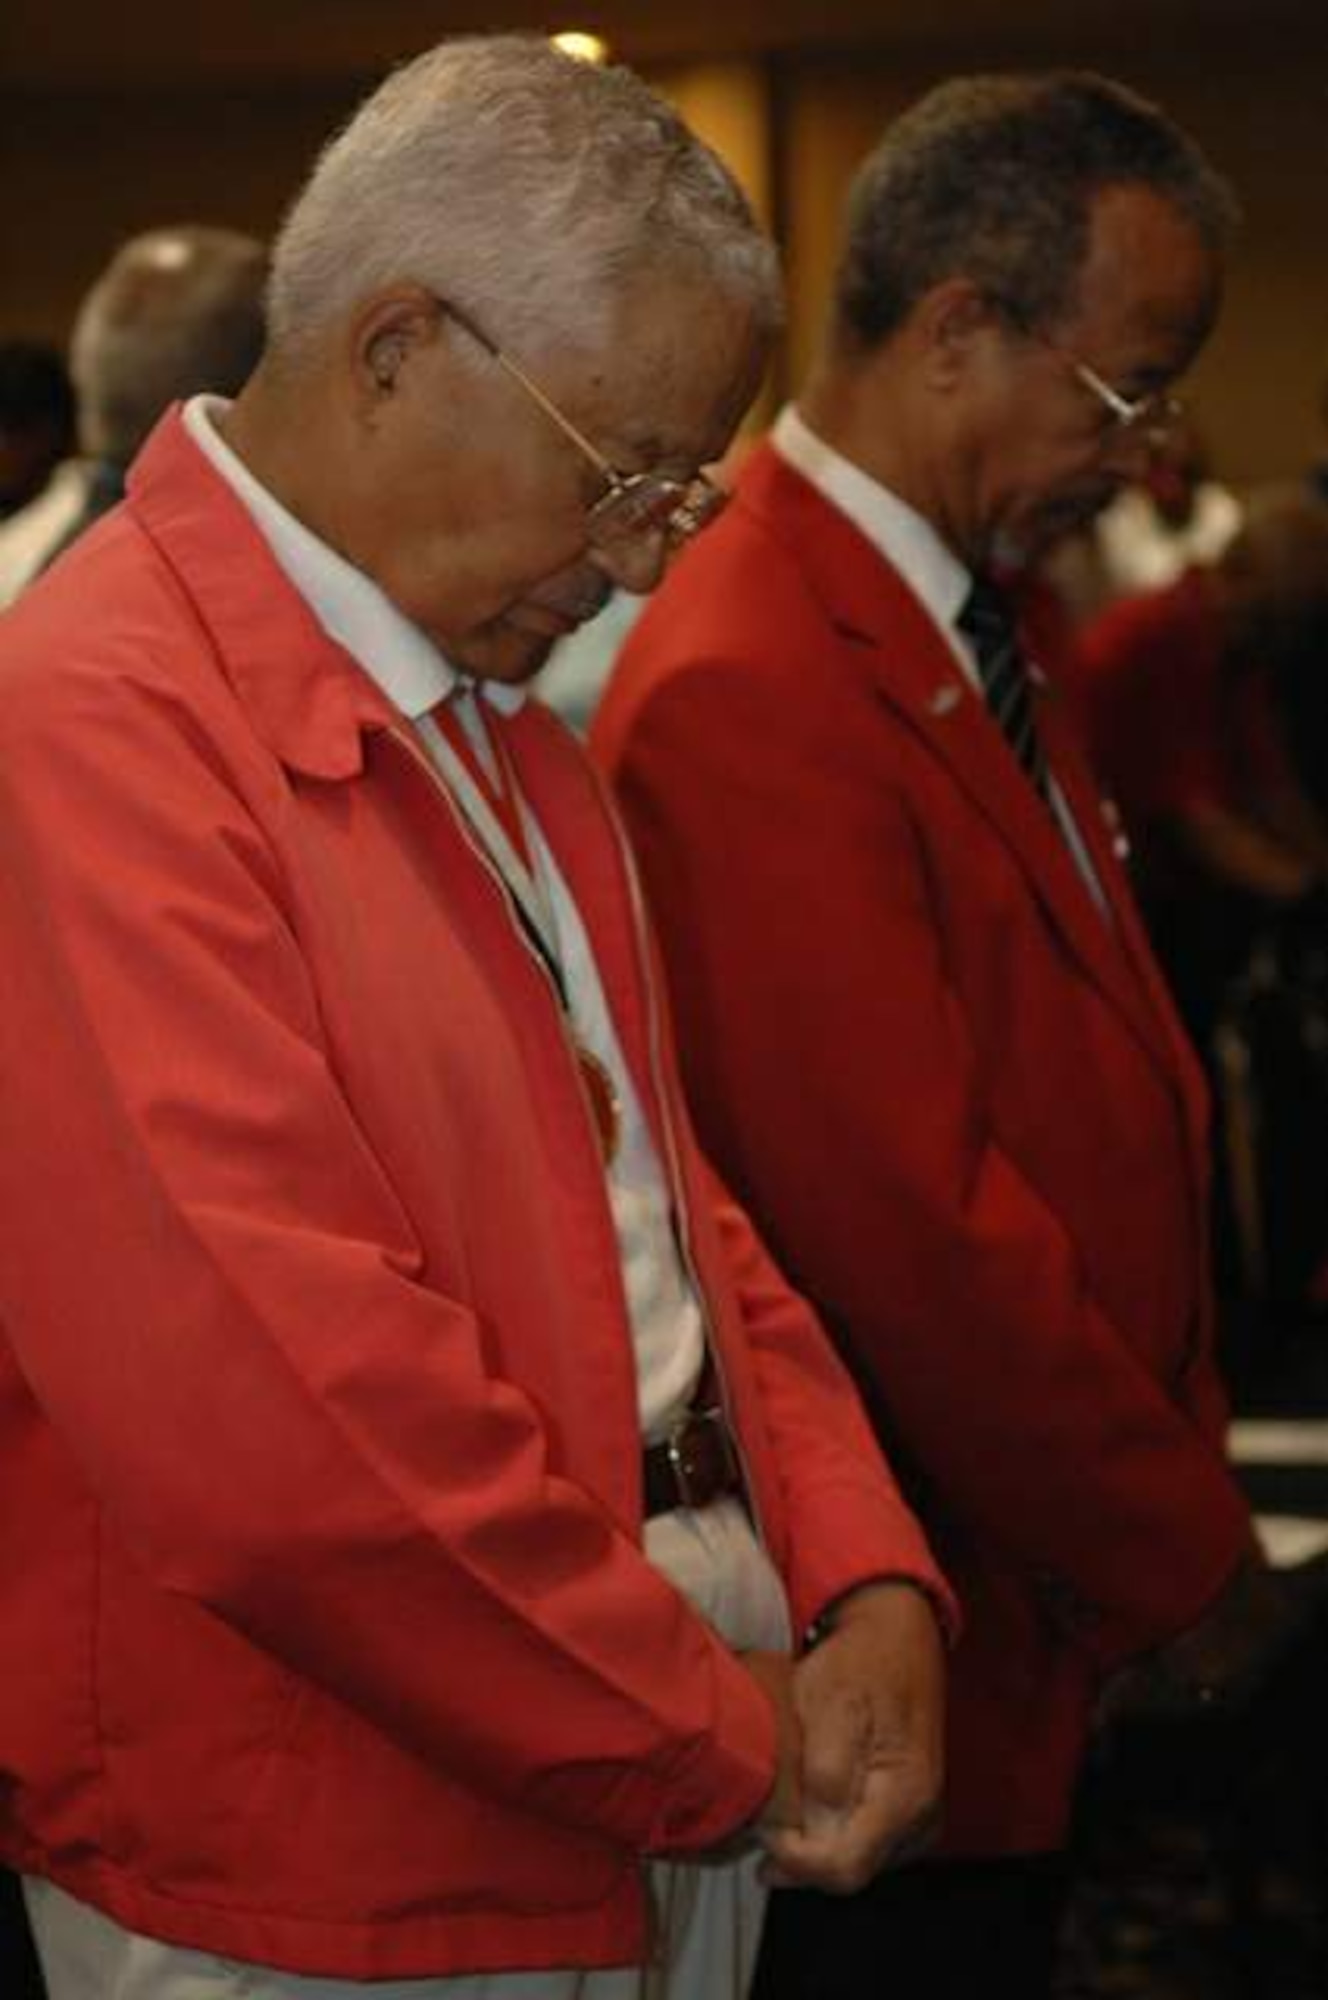 Original Tuskegee Airman and retired Col. Charles McGhee (left) bows his head in prayer next to retired Lt. Gen. Russell C. Davis during the Lonely Eagles Ceremony at the 38th Annual Tuskegee Airman, Inc. convention Aug. 7 in Las Vegas. Colonel McGhee joined the Army in 1942 and is a veteran of World War II, the Korean War and Vietnam. He flew 409 combat missions during his time in the Air Force and was formerly TAI's national president. General Davis is the Tuskegee Airman, Inc., national president. TAI is a non-profit organization dedicated to honoring the accomplishments of the African-American air, ground and operations crew members in the Army Air Corps during World War II. (U.S. Air Force photo/Senior Airman Joseph Araiza) 